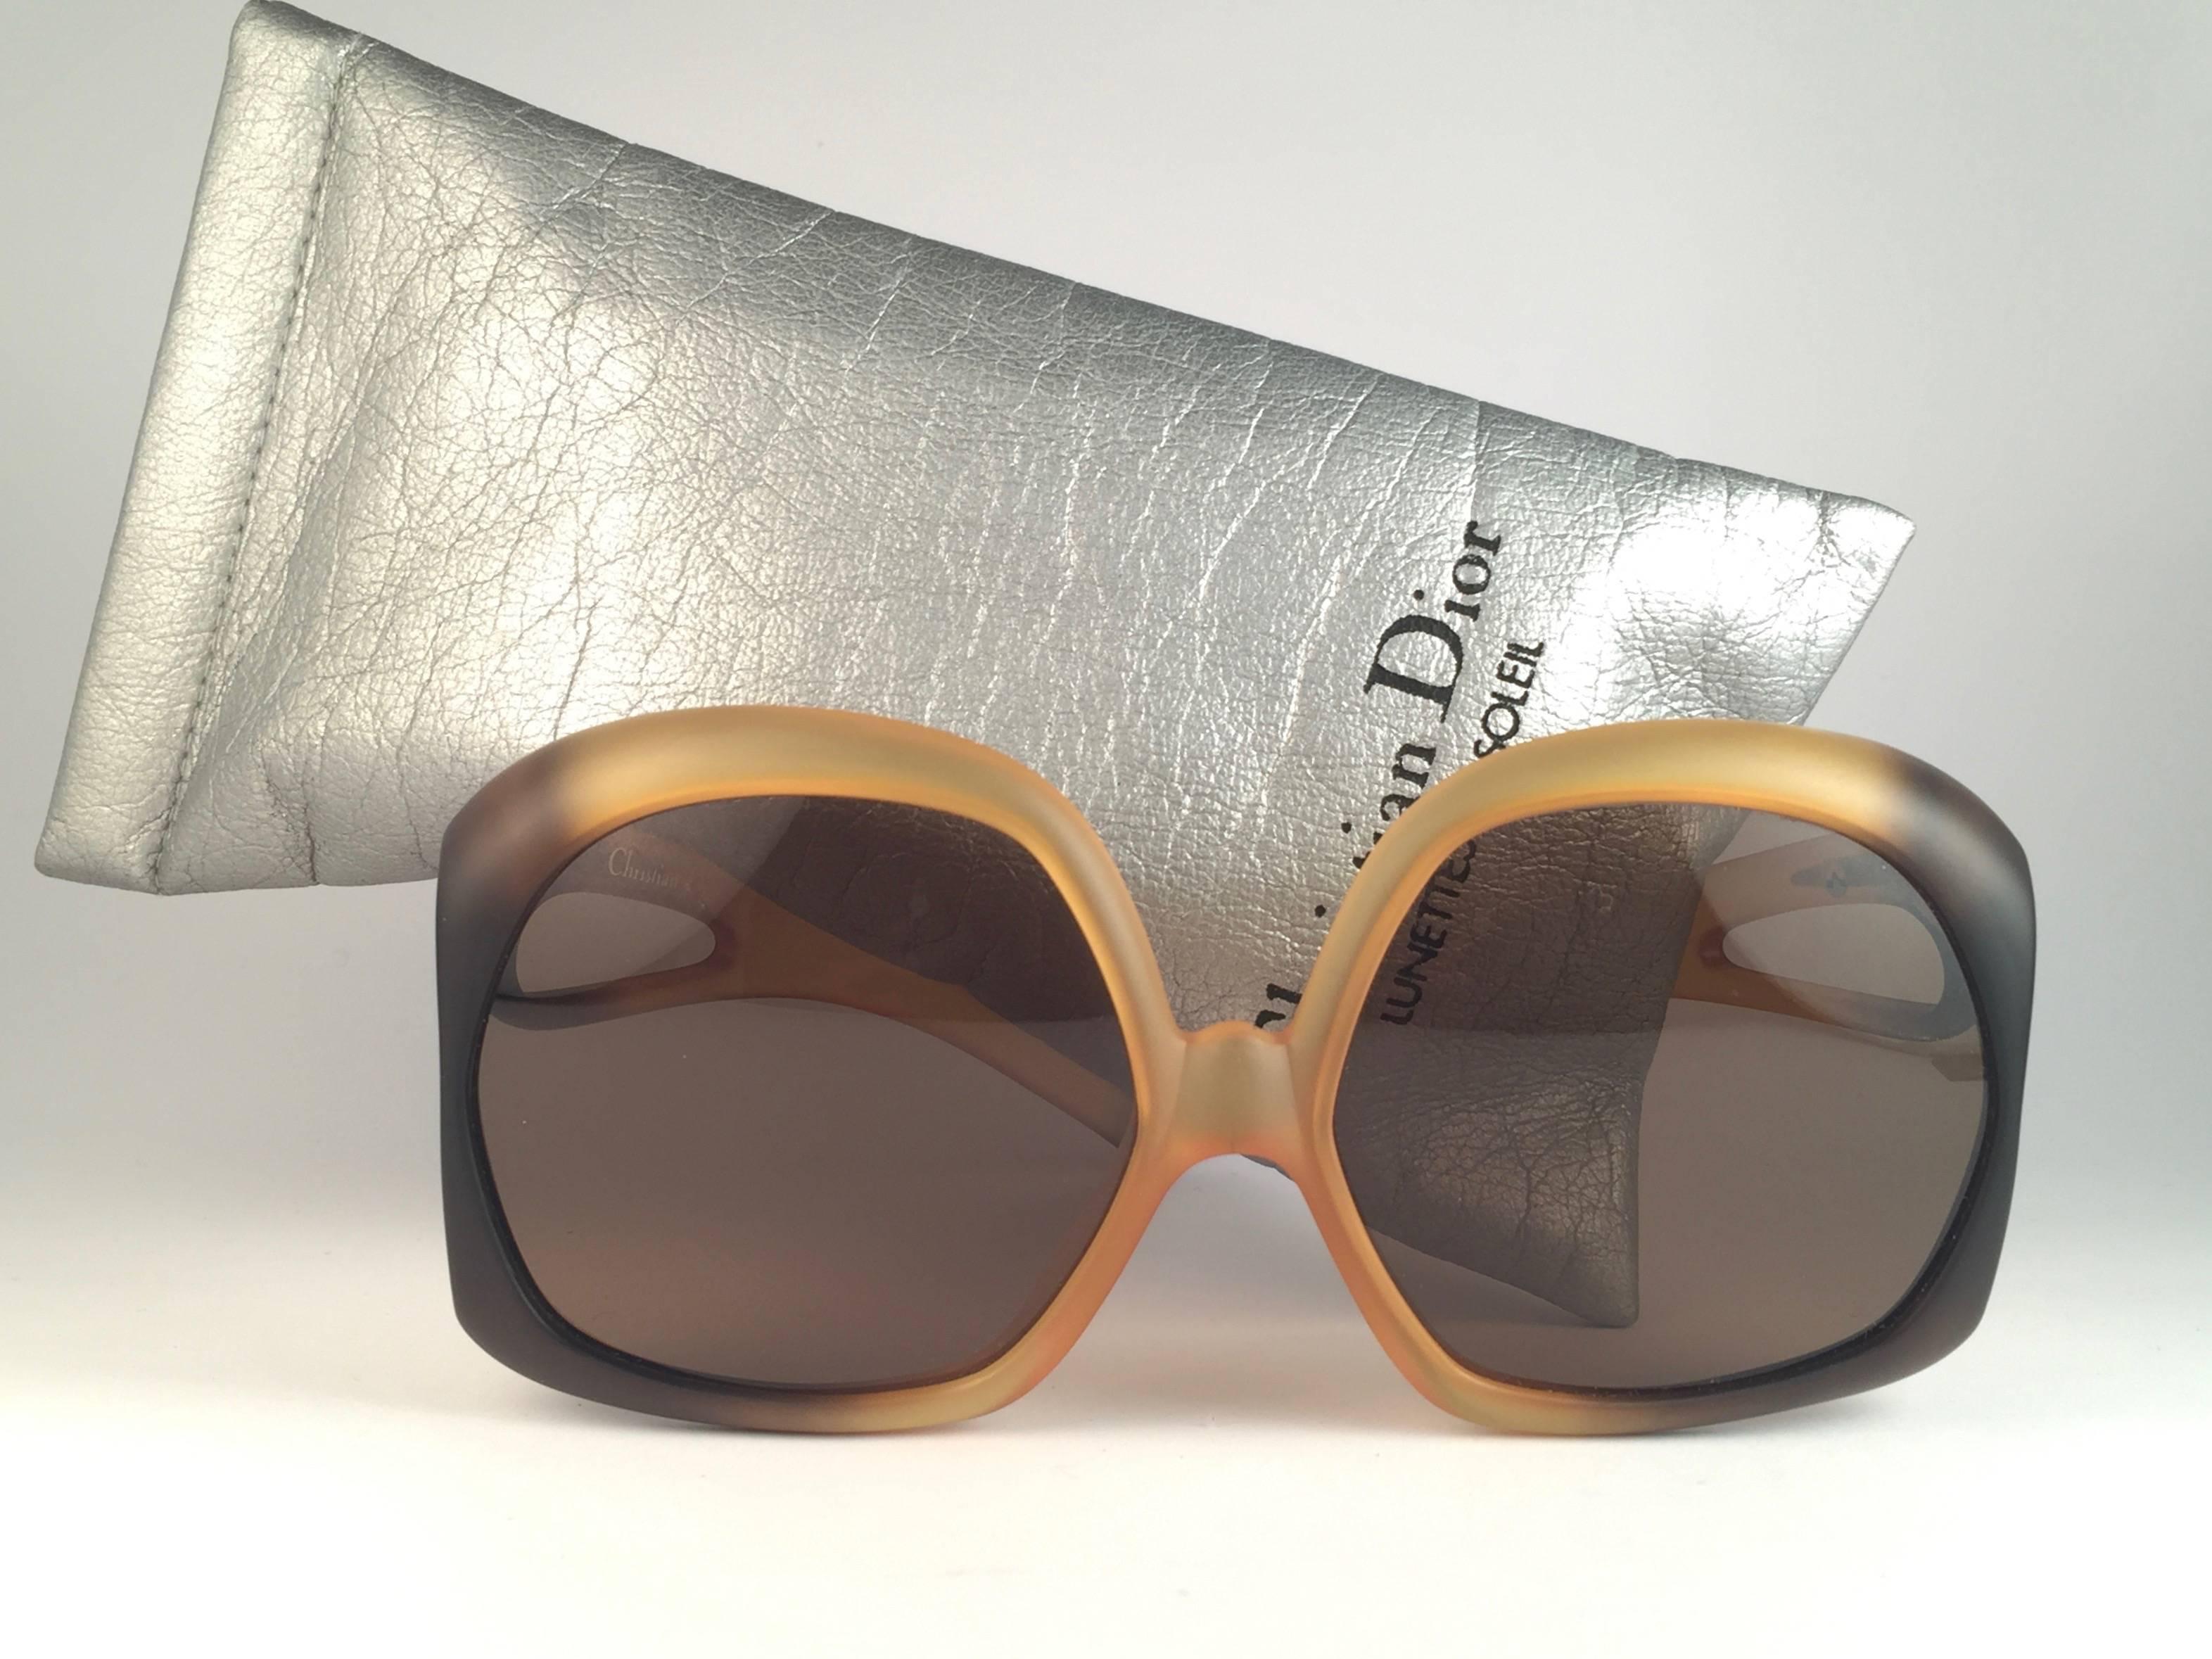 New Vintage Christian Dior 2005 Matte amber ombre frame sporting spotless solid brown lenses. 

Made in Germany.
 
Produced and design in 1970's.

New, never worn or displayed. Comes with its original silver Christian Dior Lunettes sleeve.